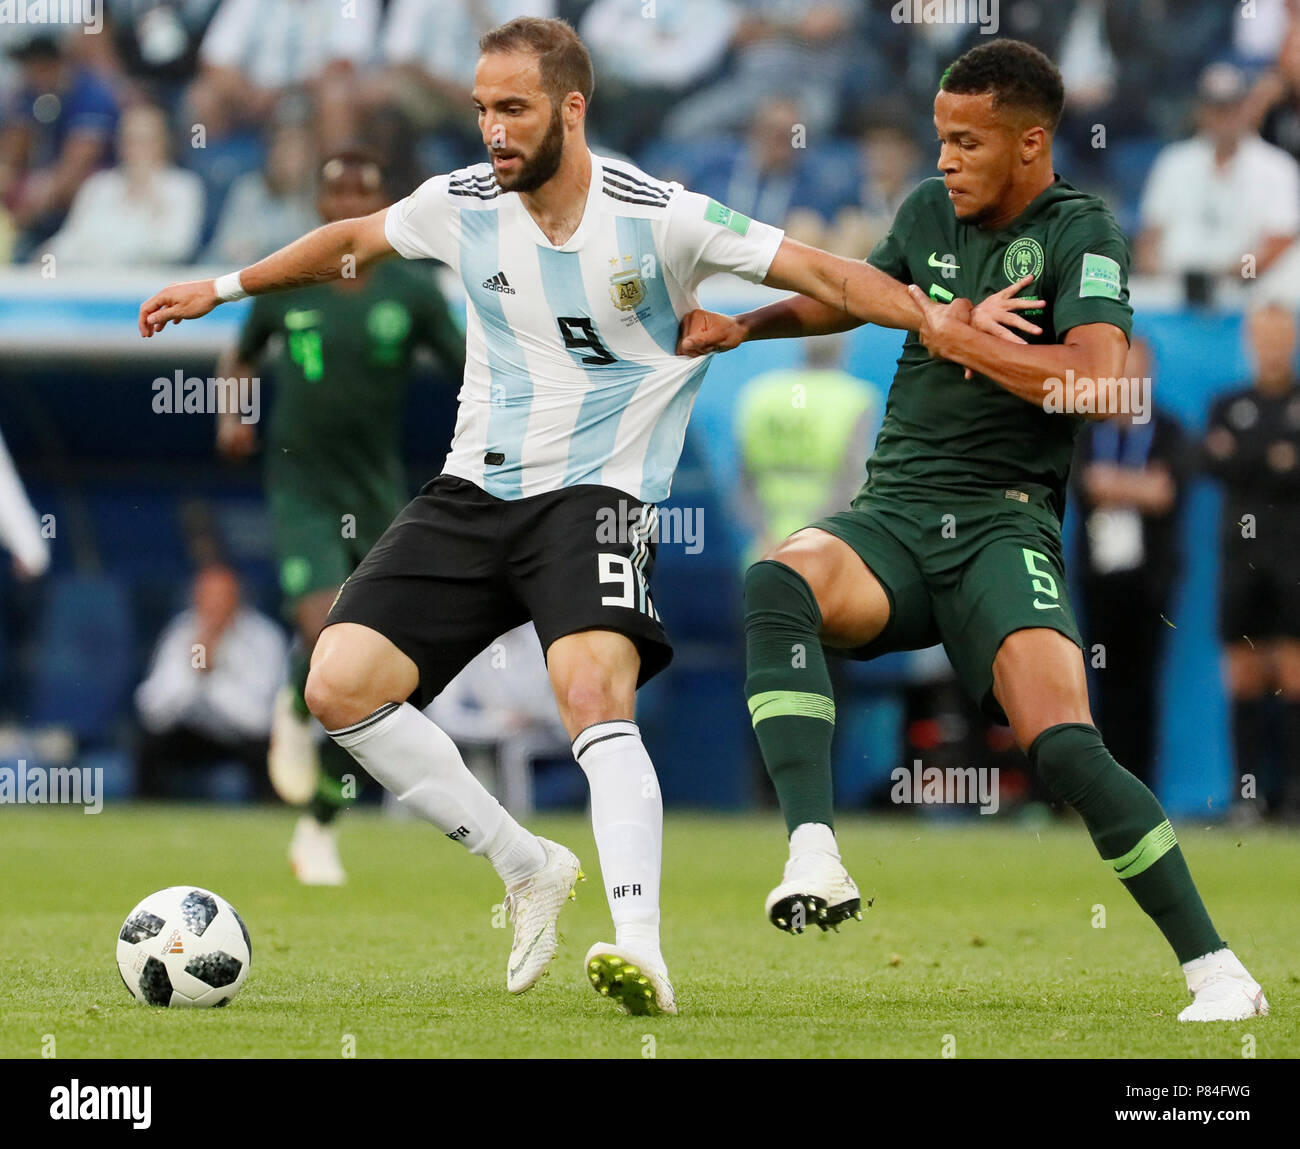 SAINT PETERSBURG, RUSSIA - JUNE 26: William Ekong (R) of Nigeria national team and Gonzalo Higuain of Argentina national team vie for the ball during the 2018 FIFA World Cup Russia group D match between Nigeria and Argentina at Saint Petersburg Stadium on June 26, 2018 in Saint Petersburg, Russia. (MB Media) Stock Photo